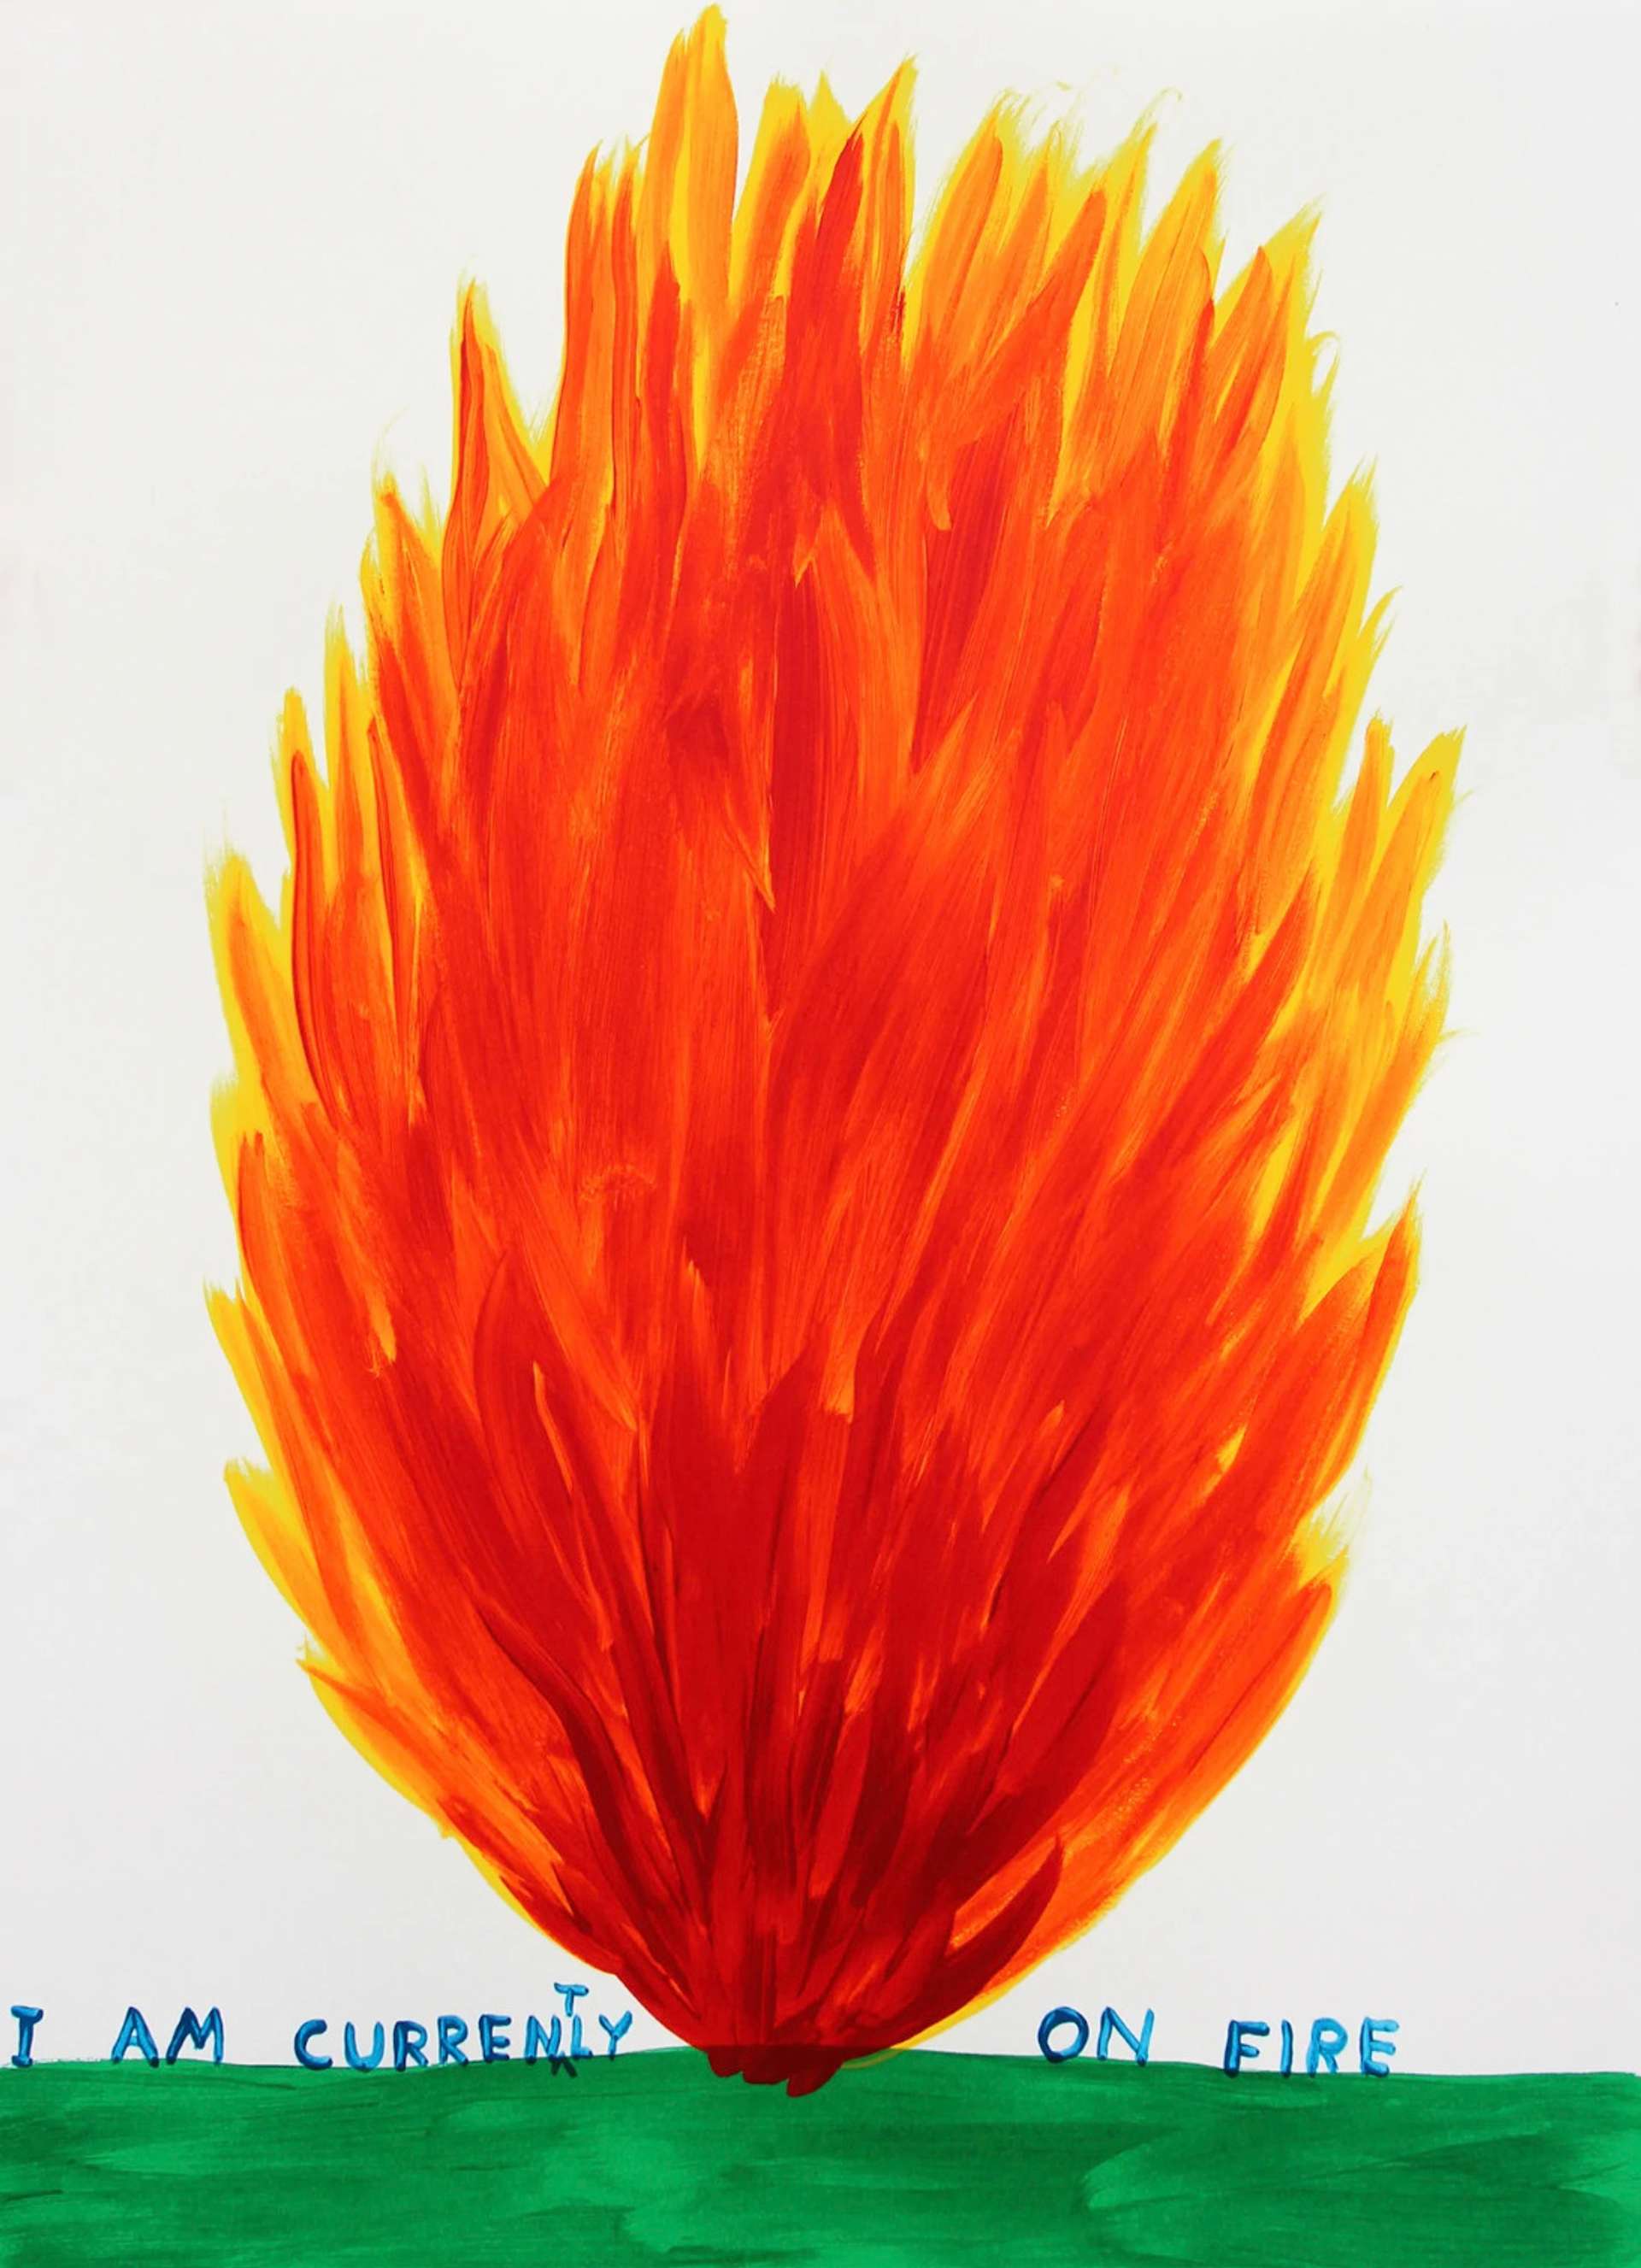 An image of the print I Am Currently On Fire by artist David Shrigley, showing a large fire on some grass. At the bottom of the flame is the print’s title